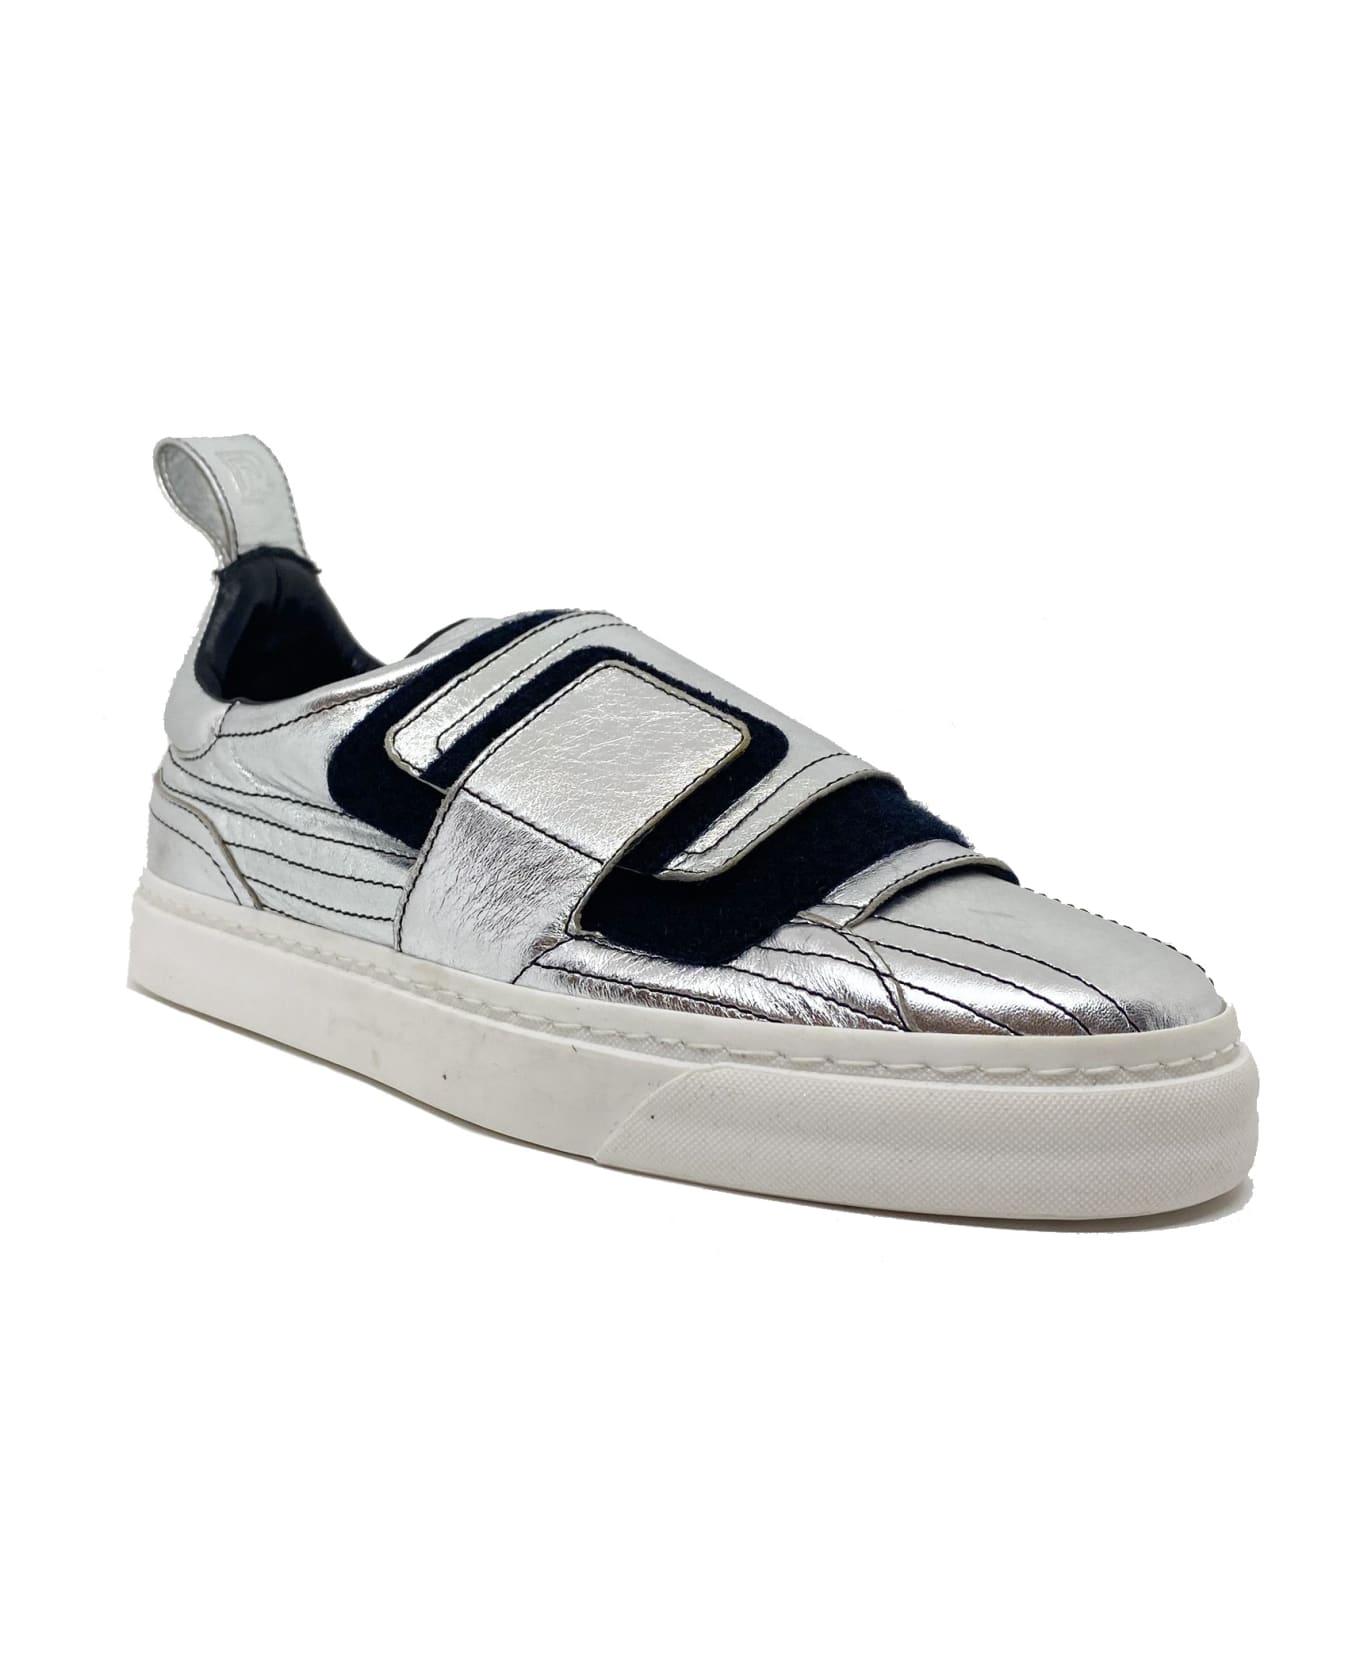 Paco Rabanne Crackled Metallic Leather Sneakers - Silver